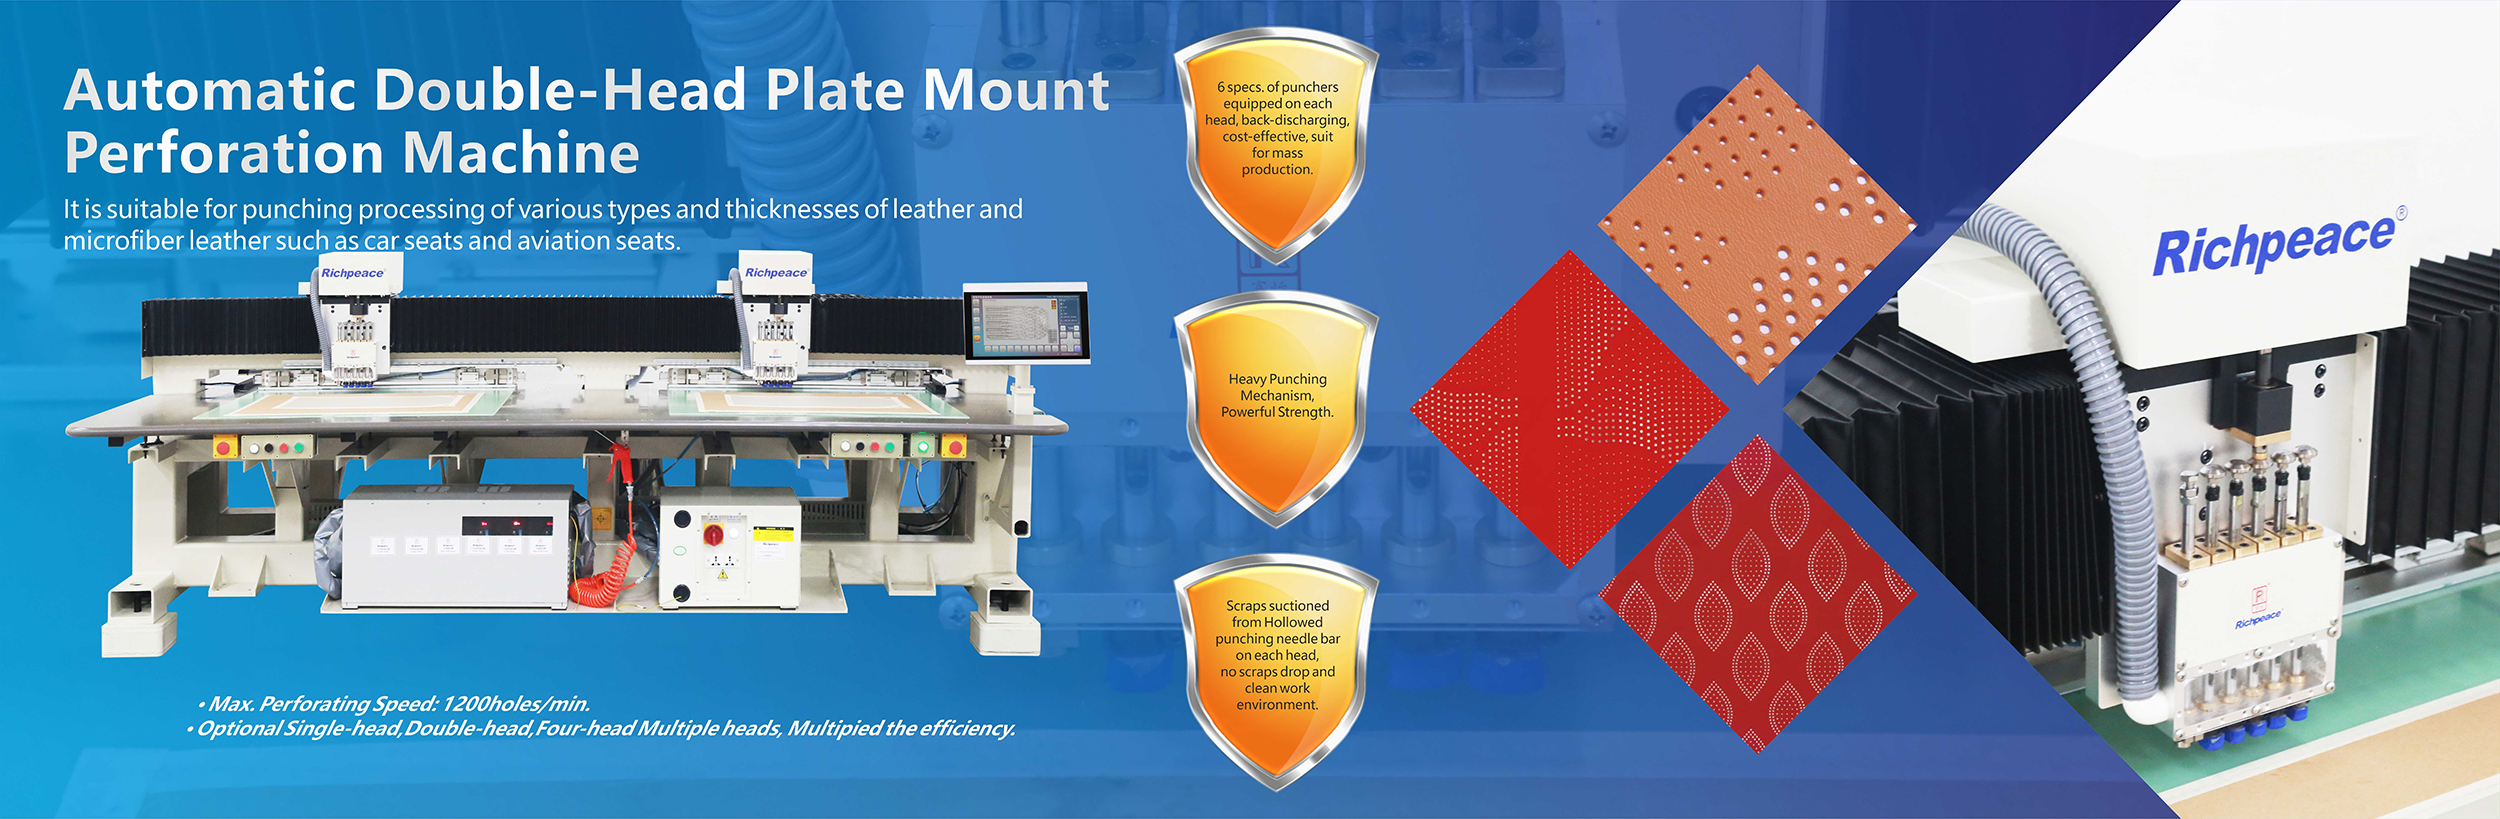 Automatic Double-Head Plate Mount Perforation Machine 